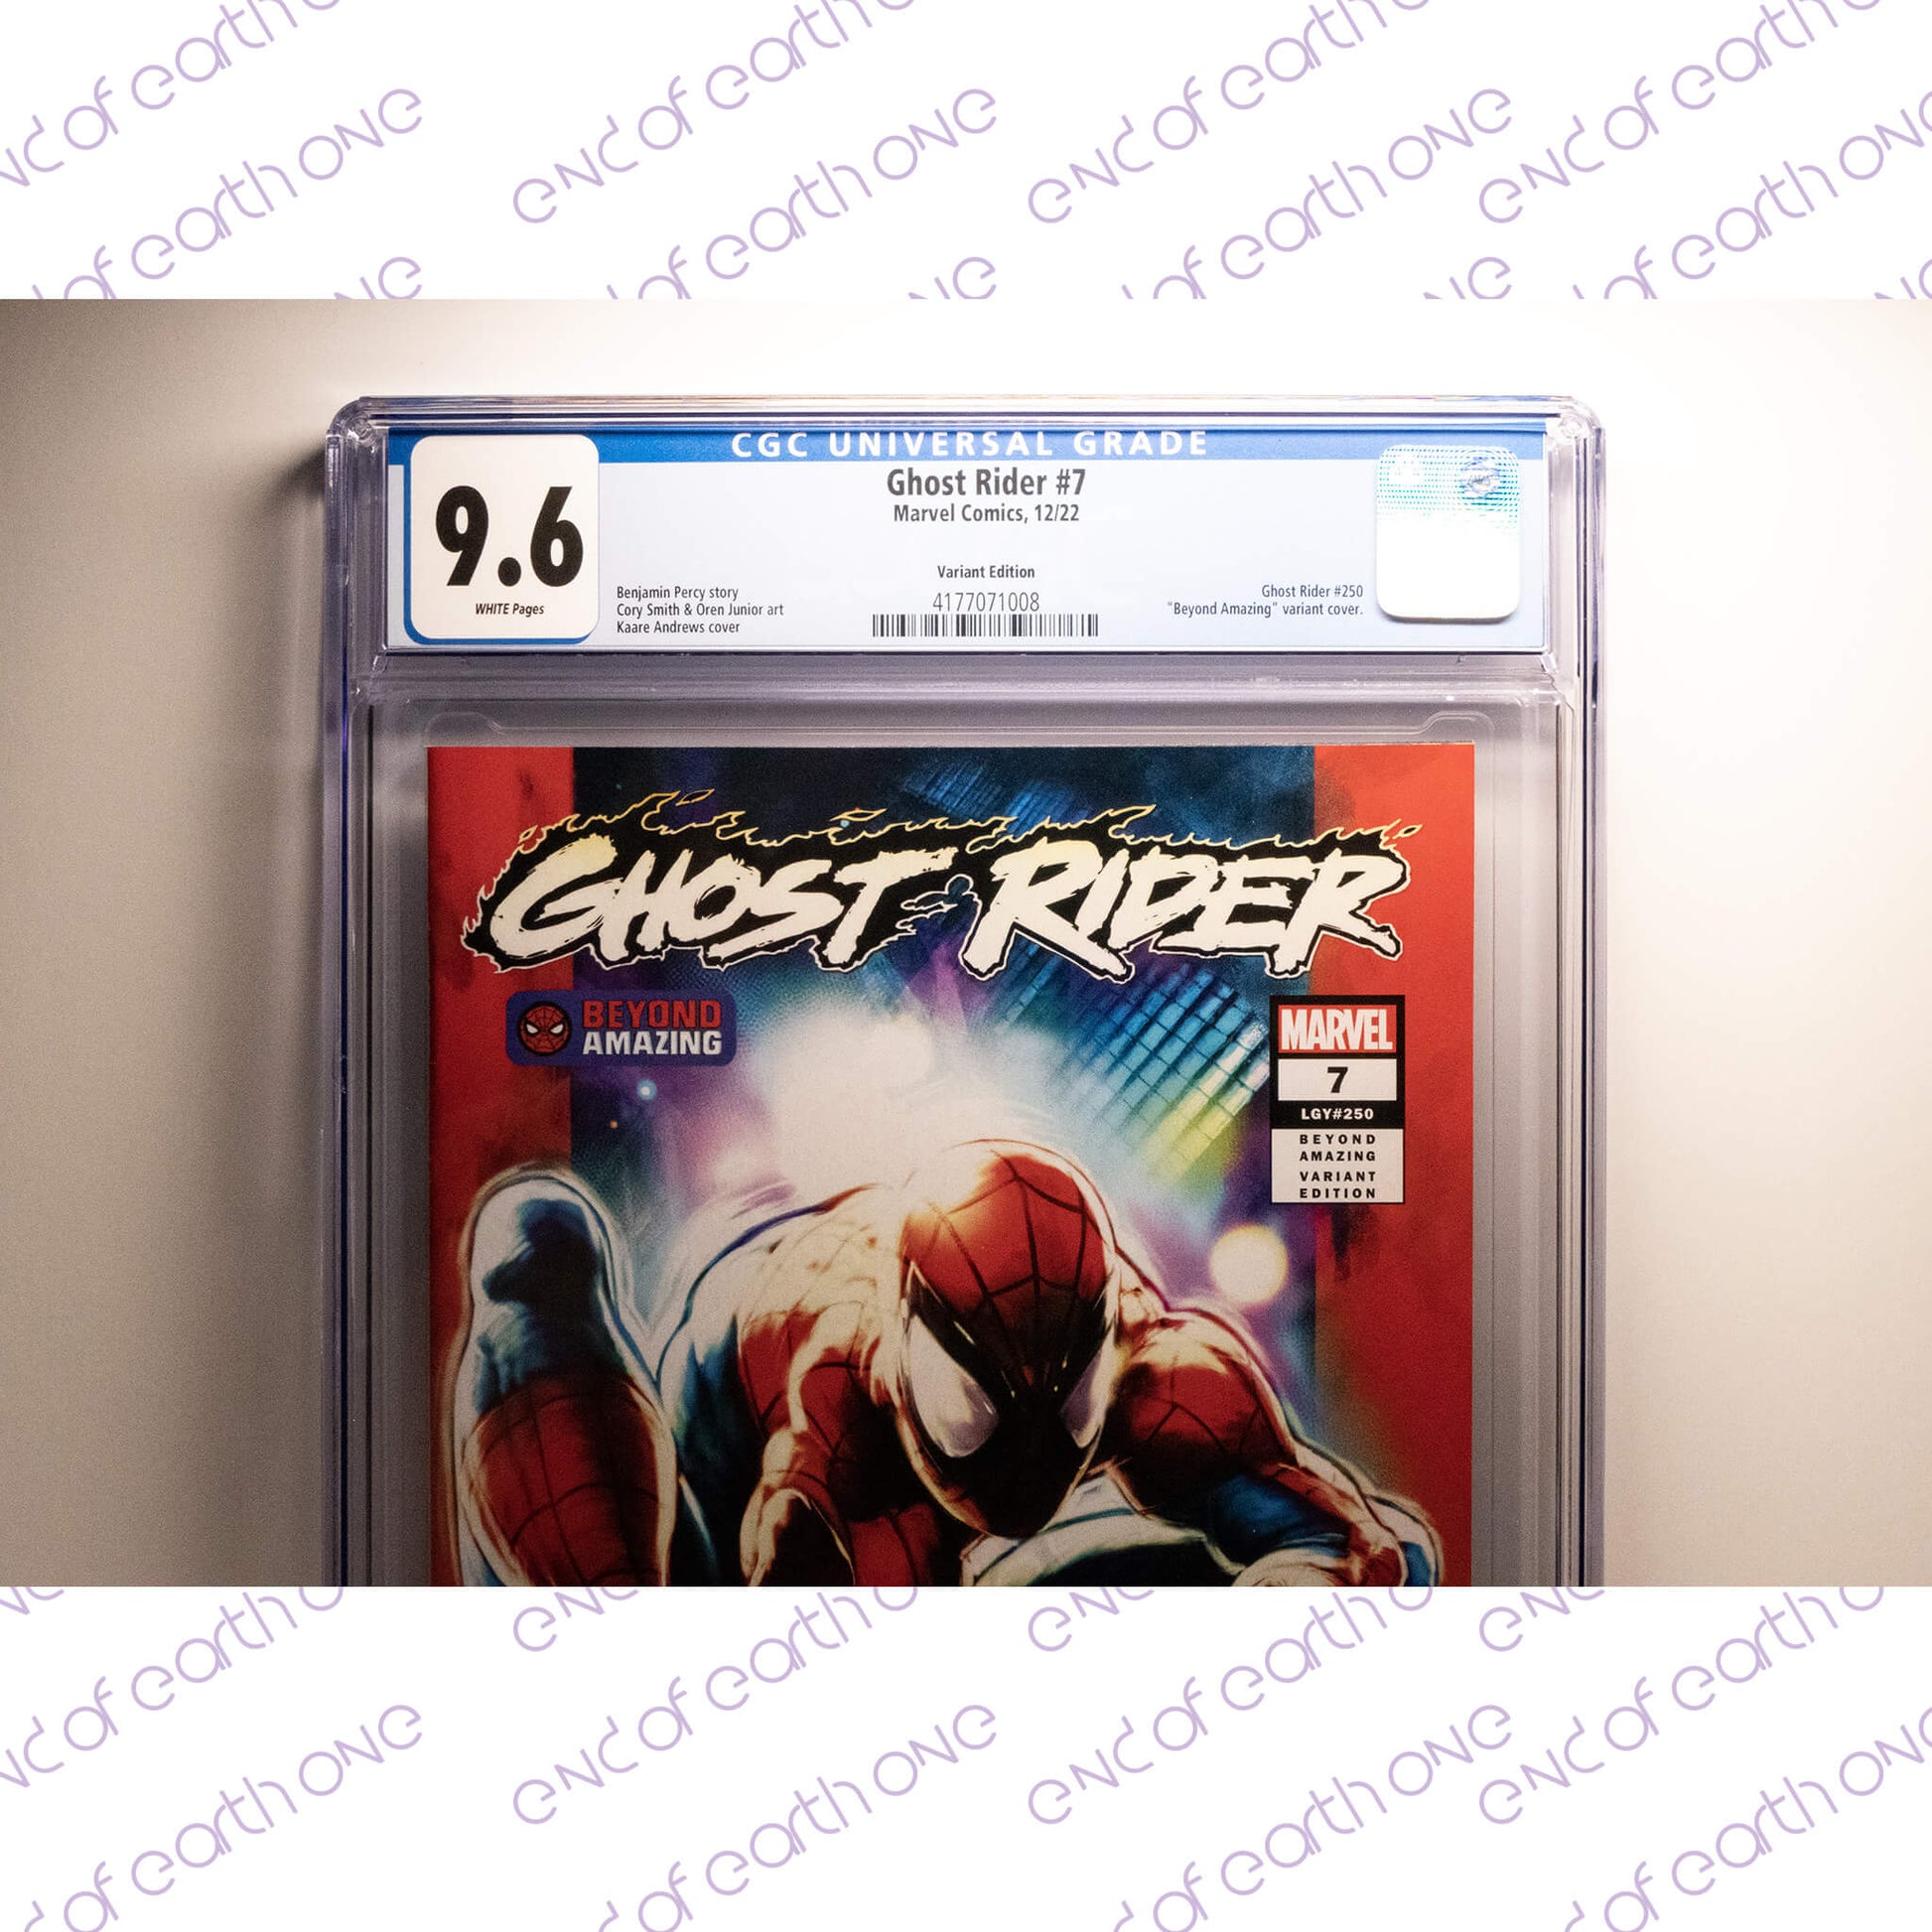 ghost rider beyond amazing spider man variant cover cgc 9.6 top